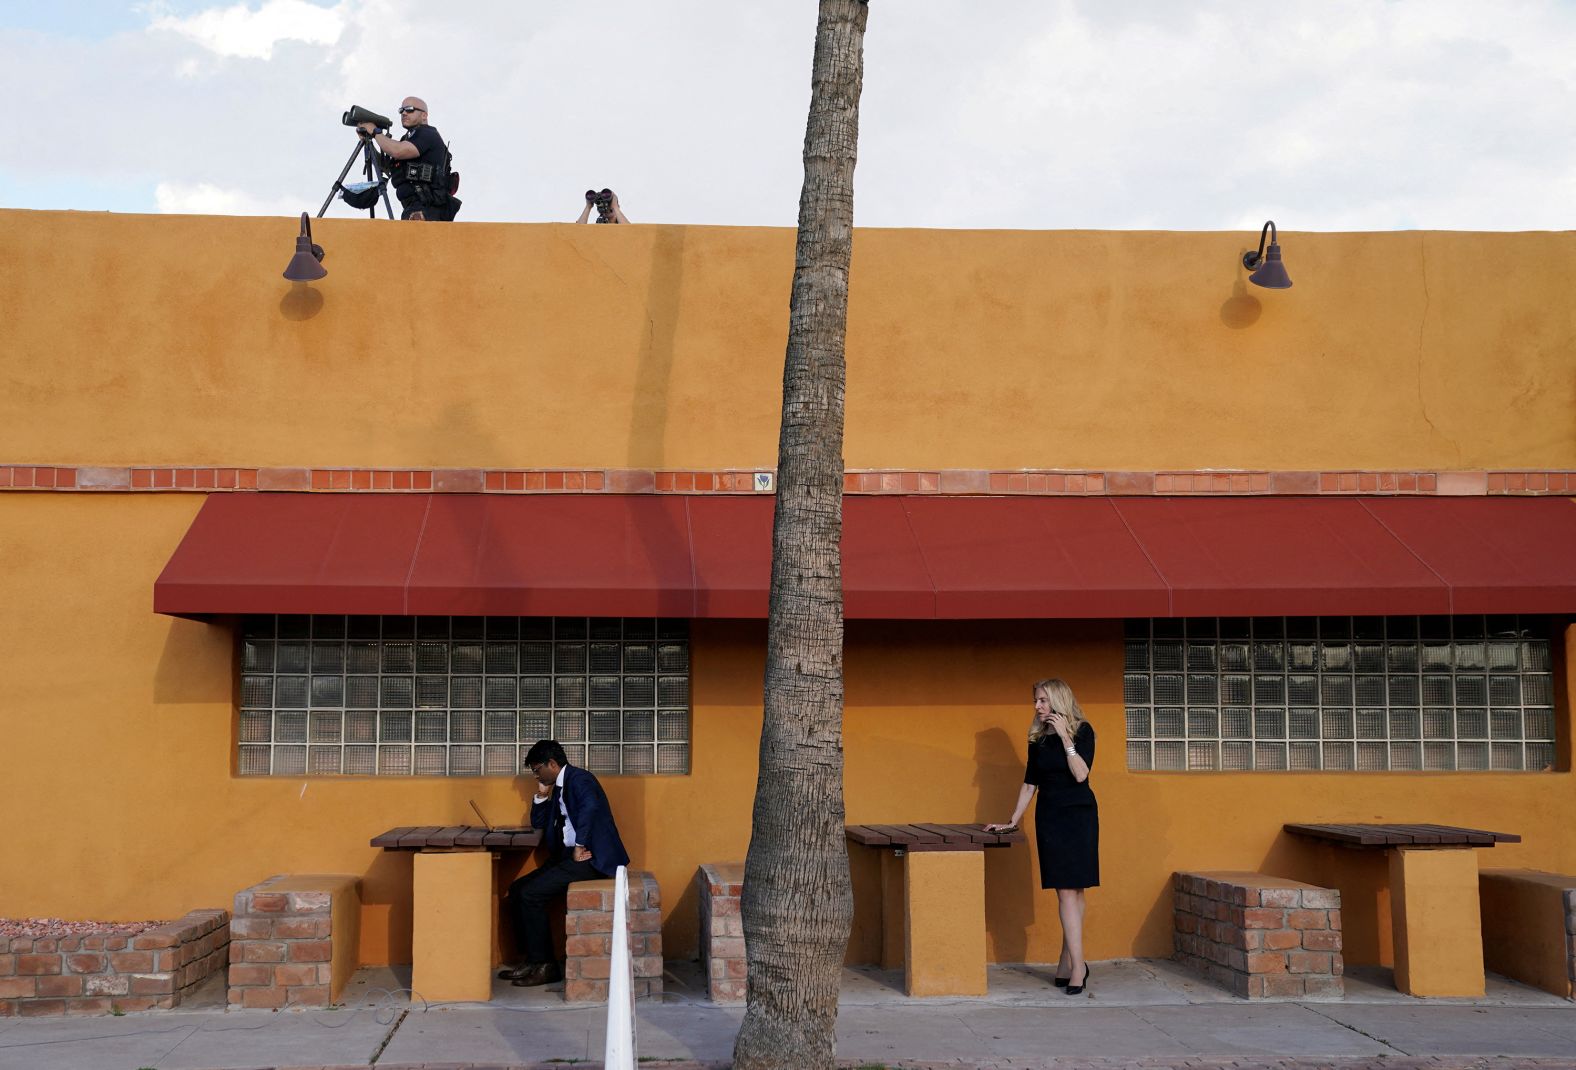 President Joe Biden's director of speech writing Vinay Reddy works at his laptop and White House economic advisor Lael Brainard talks on her phone as members of the Secret Service keep watch atop a Mexican restaurant where Biden was holding a campaign event in Phoenix on Tuesday, March 19. The president took his reelection pitch to <a href="index.php?page=&url=https%3A%2F%2Fwww.cnn.com%2F2024%2F03%2F19%2Fpolitics%2Fjoe-biden-western-swing%2Findex.html" target="_blank">Western battleground states</a> this week.